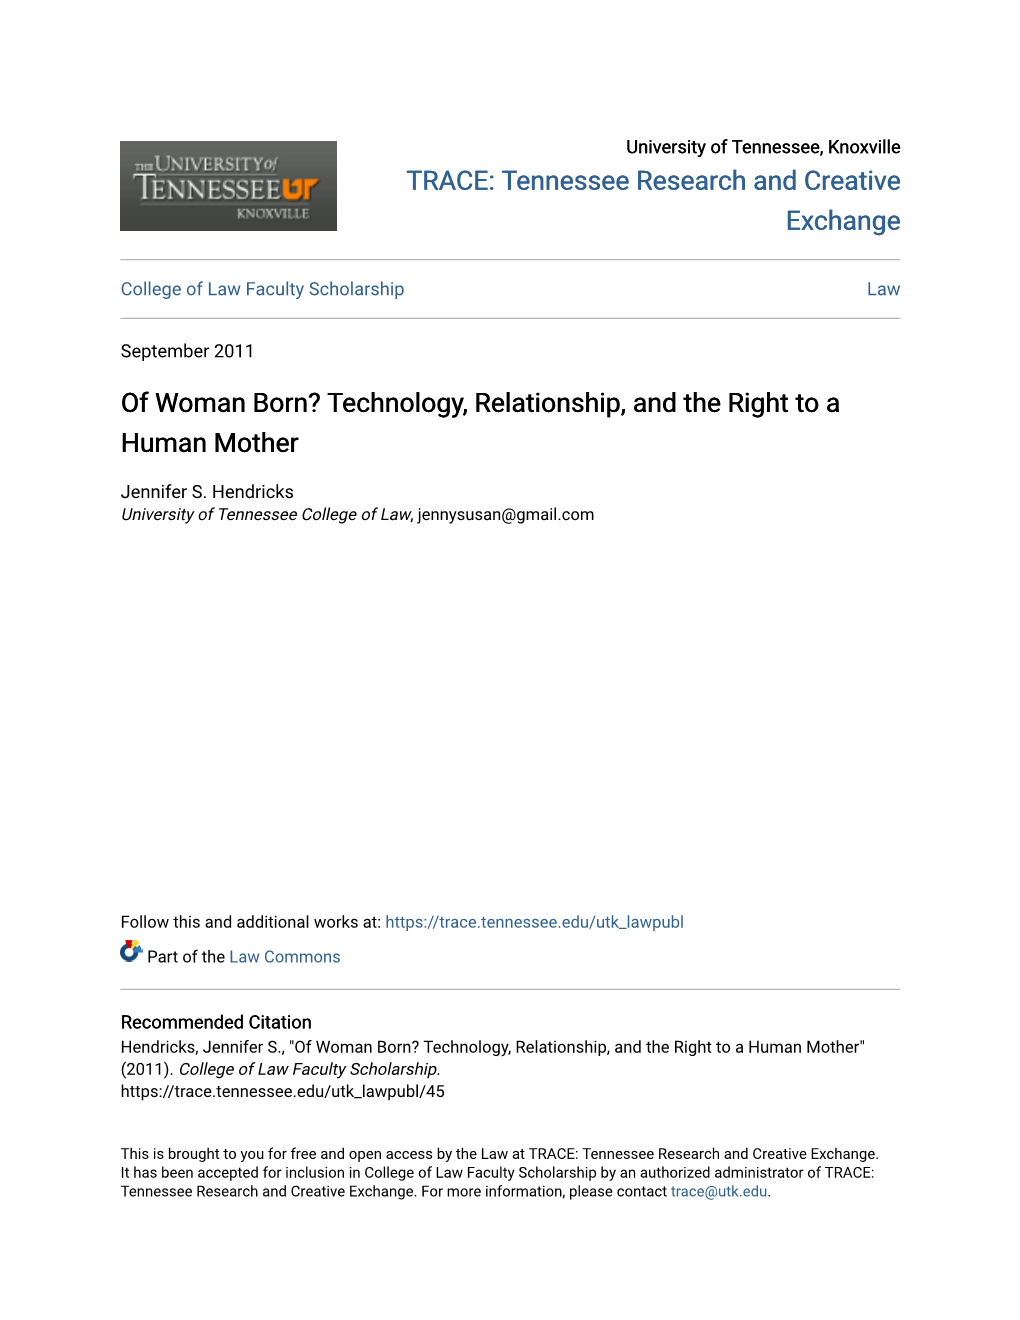 Of Woman Born? Technology, Relationship, and the Right to a Human Mother